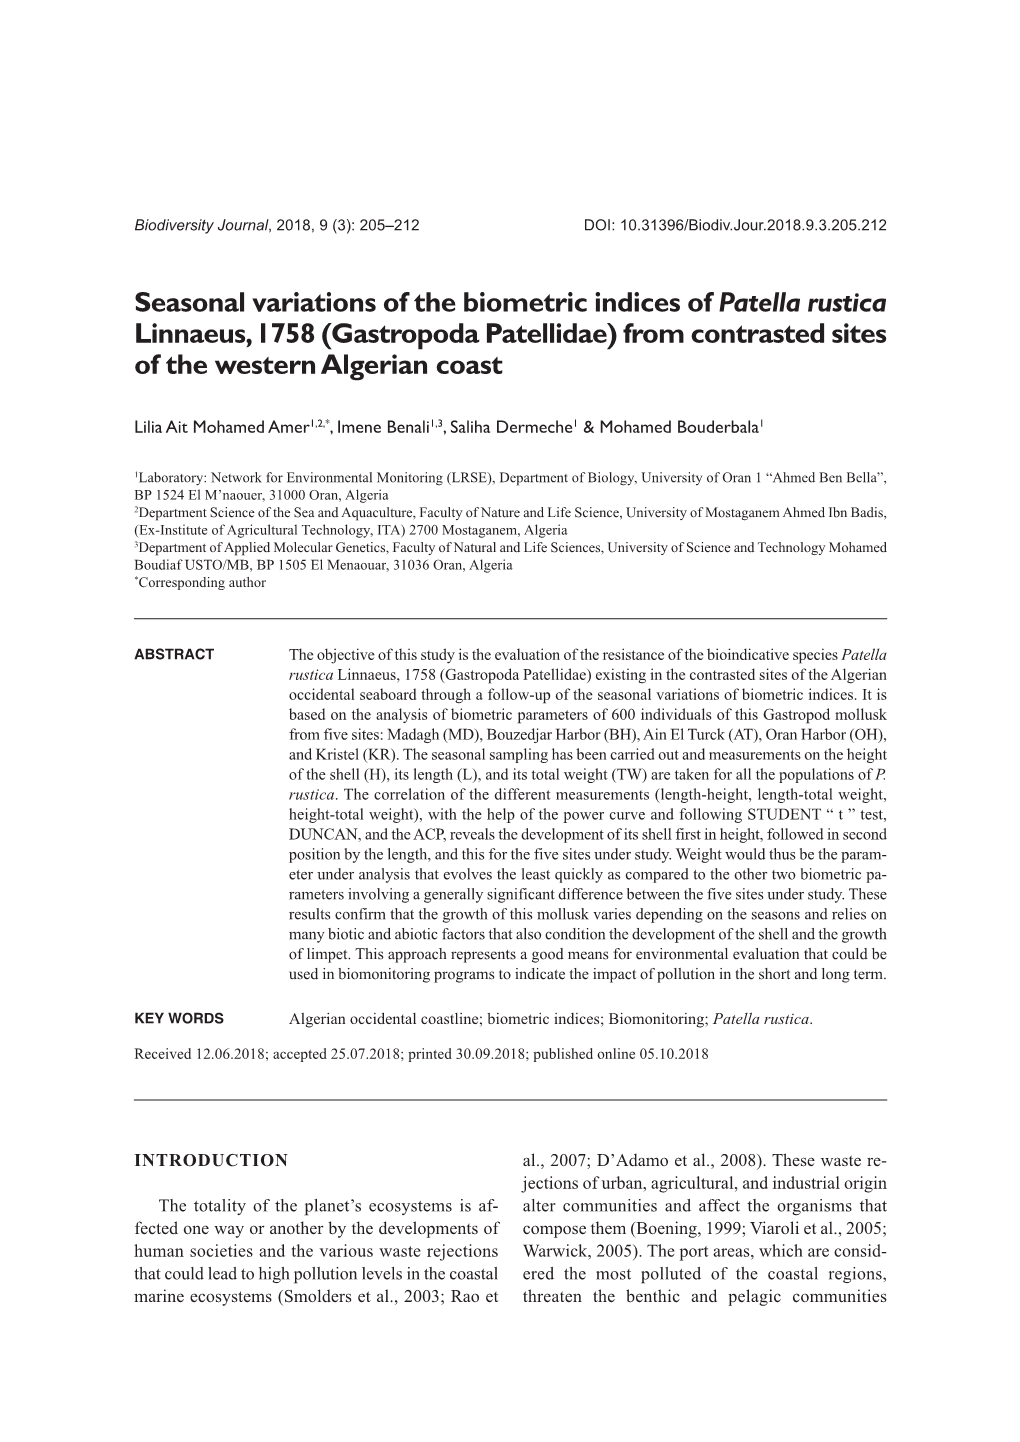 Seasonal Variations of the Biometric Indices of Patella Rustica Linnaeus, 1758 (Gastropoda Patellidae) from Contrasted Sites of the Western Algerian Coast